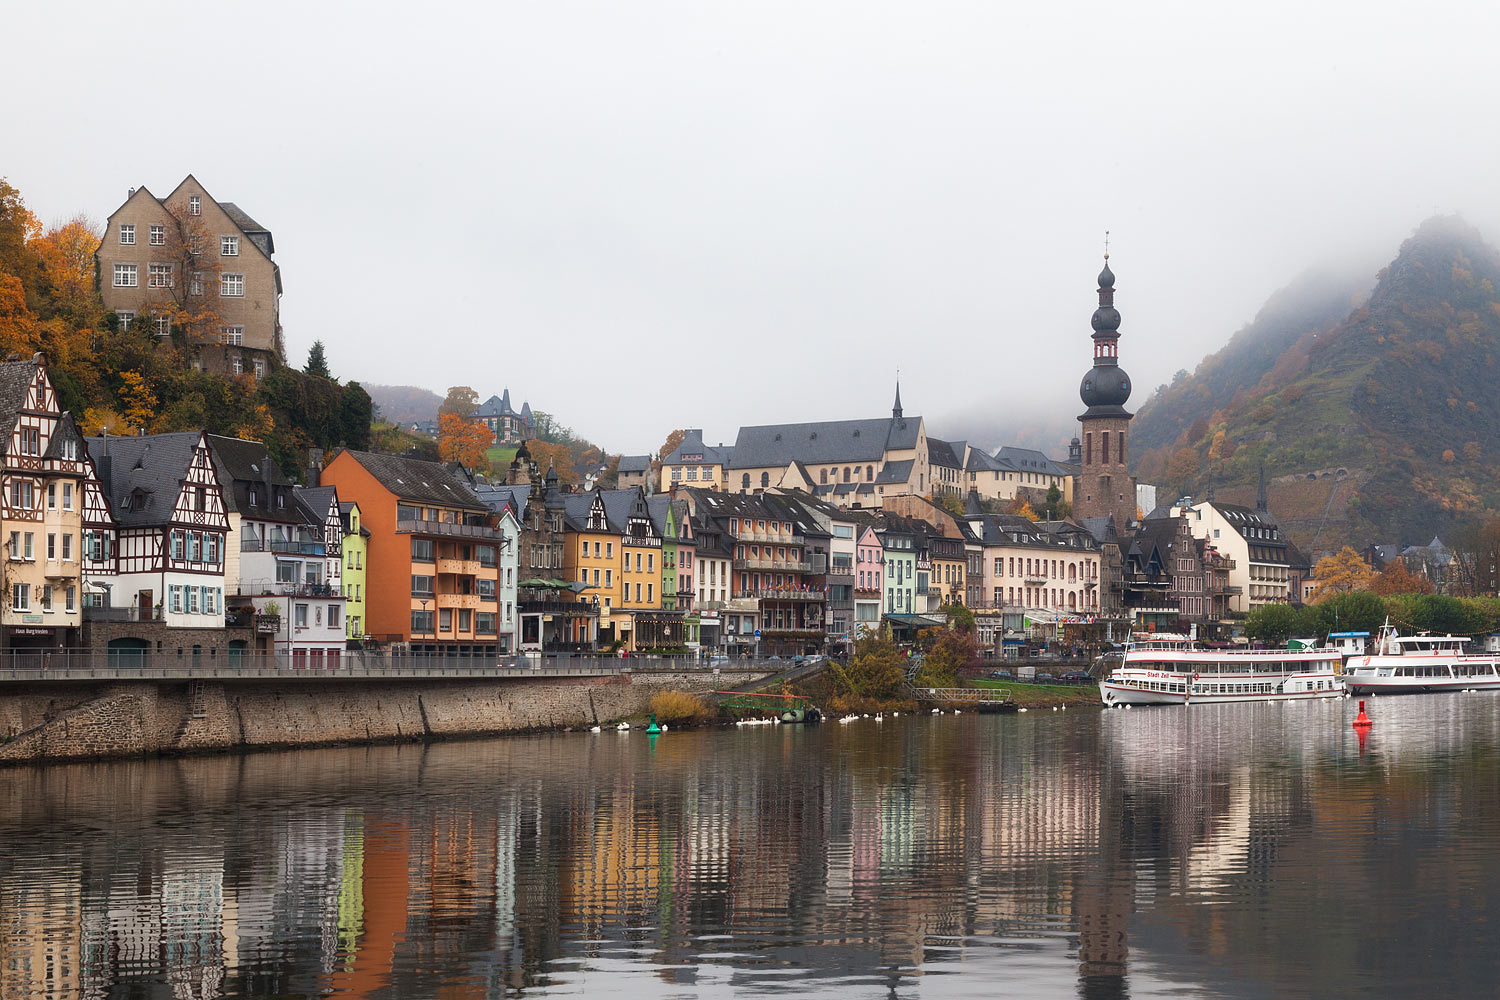 Mist over the town of Cochem in Rhineland-Palatinate, Germany